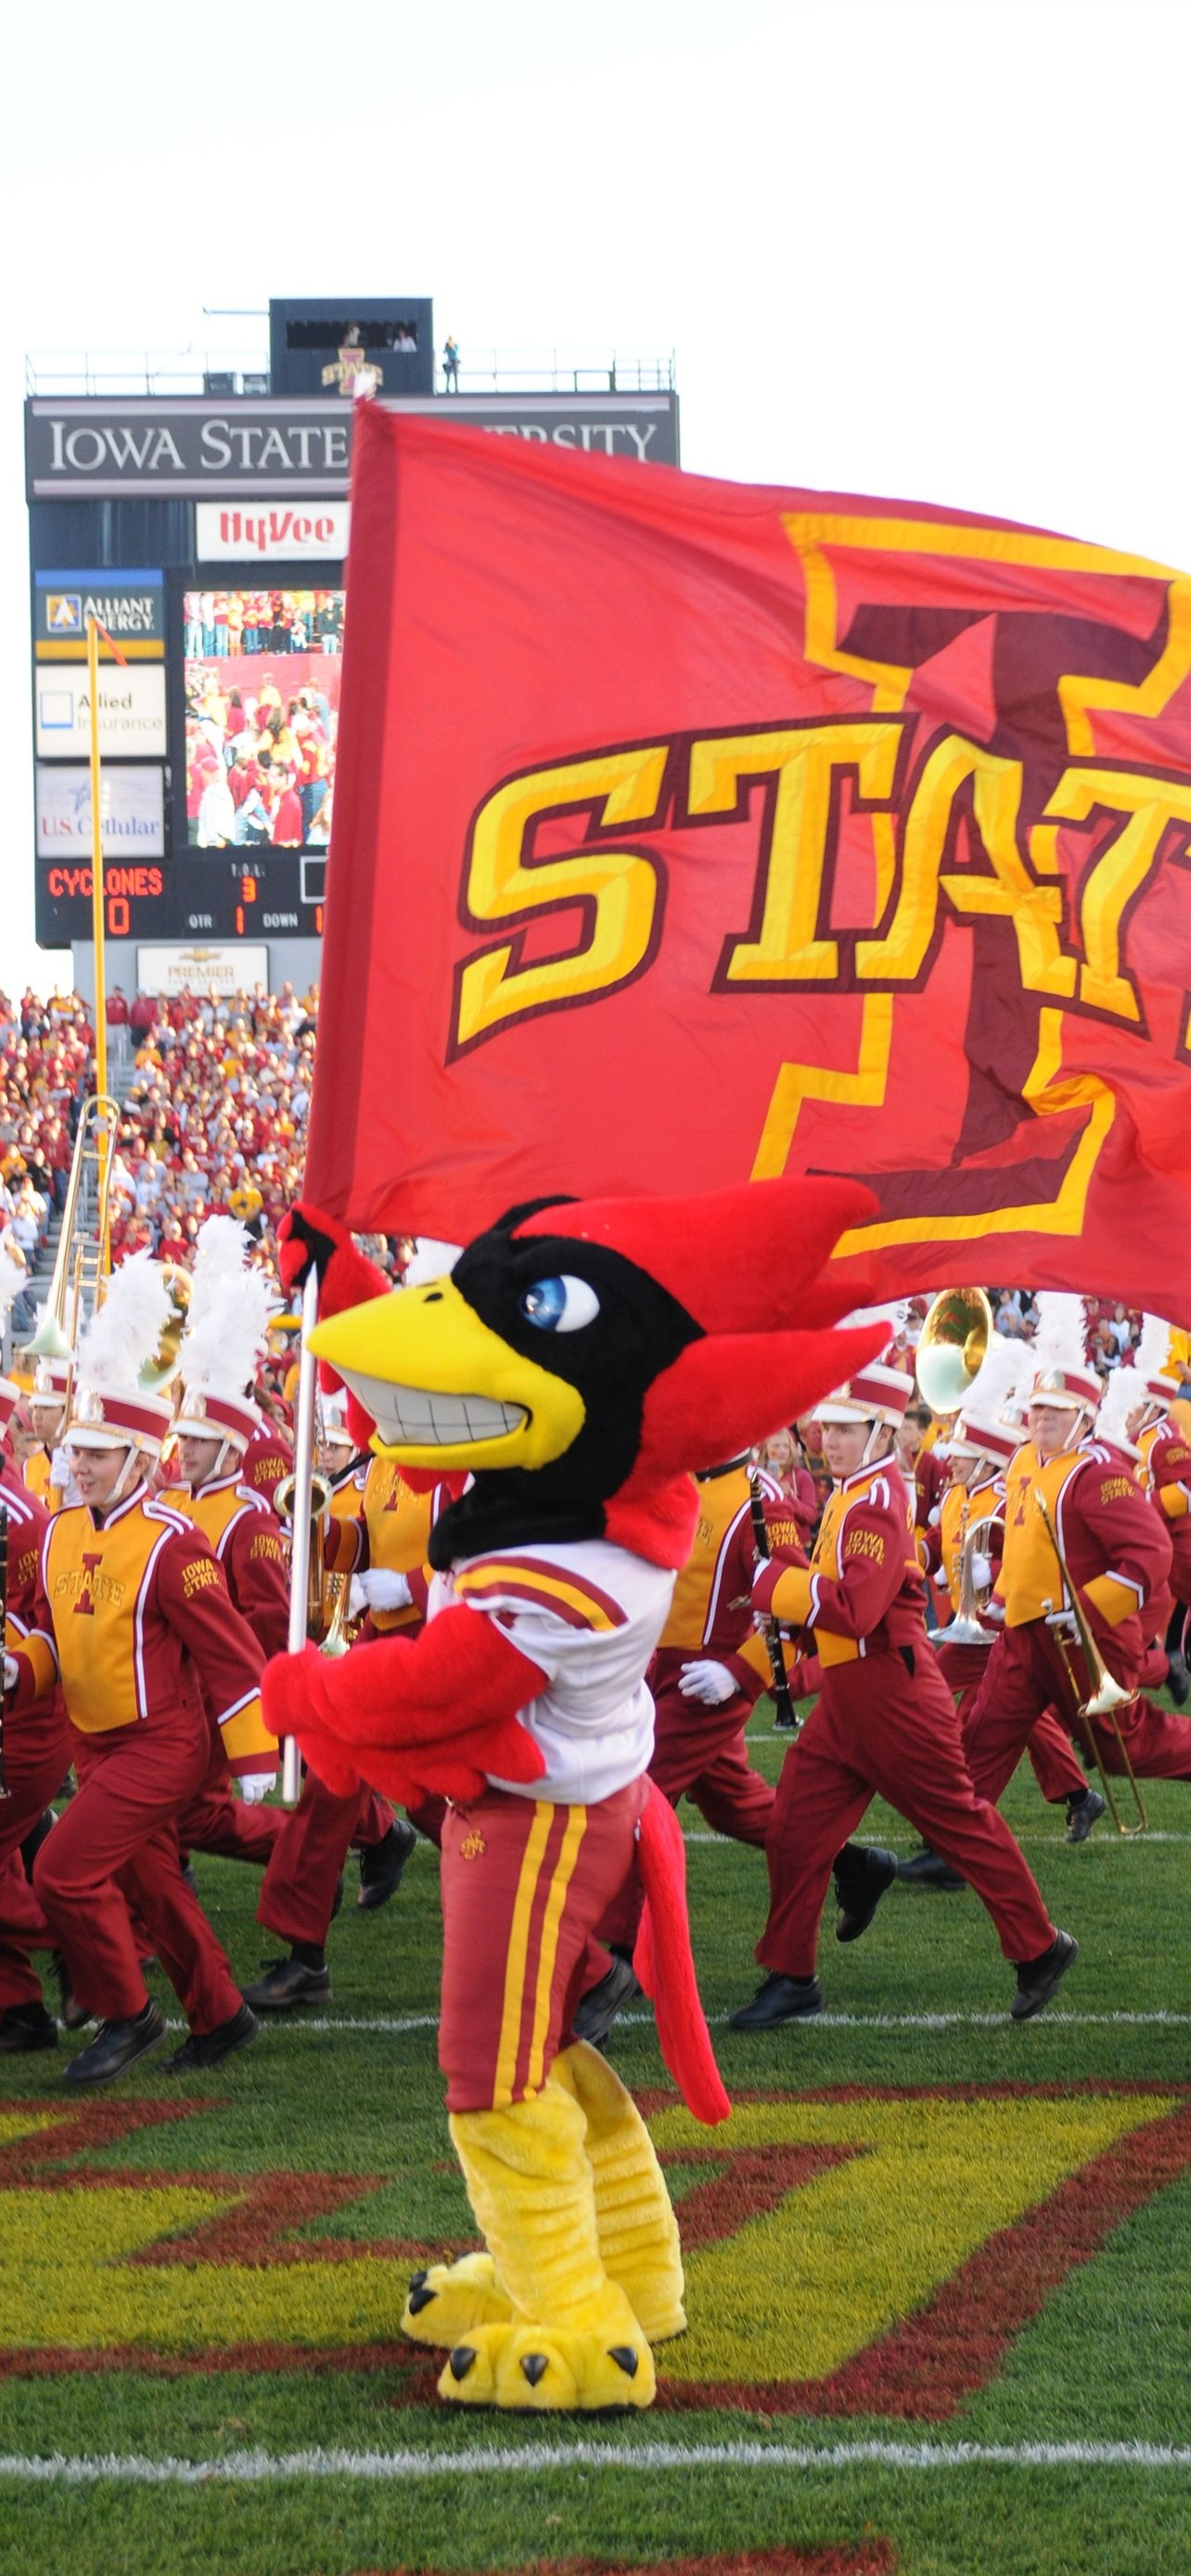 Iowa State, College phone wallpapers, Iowa State University, iPhone backgrounds, 1290x2780 HD Phone